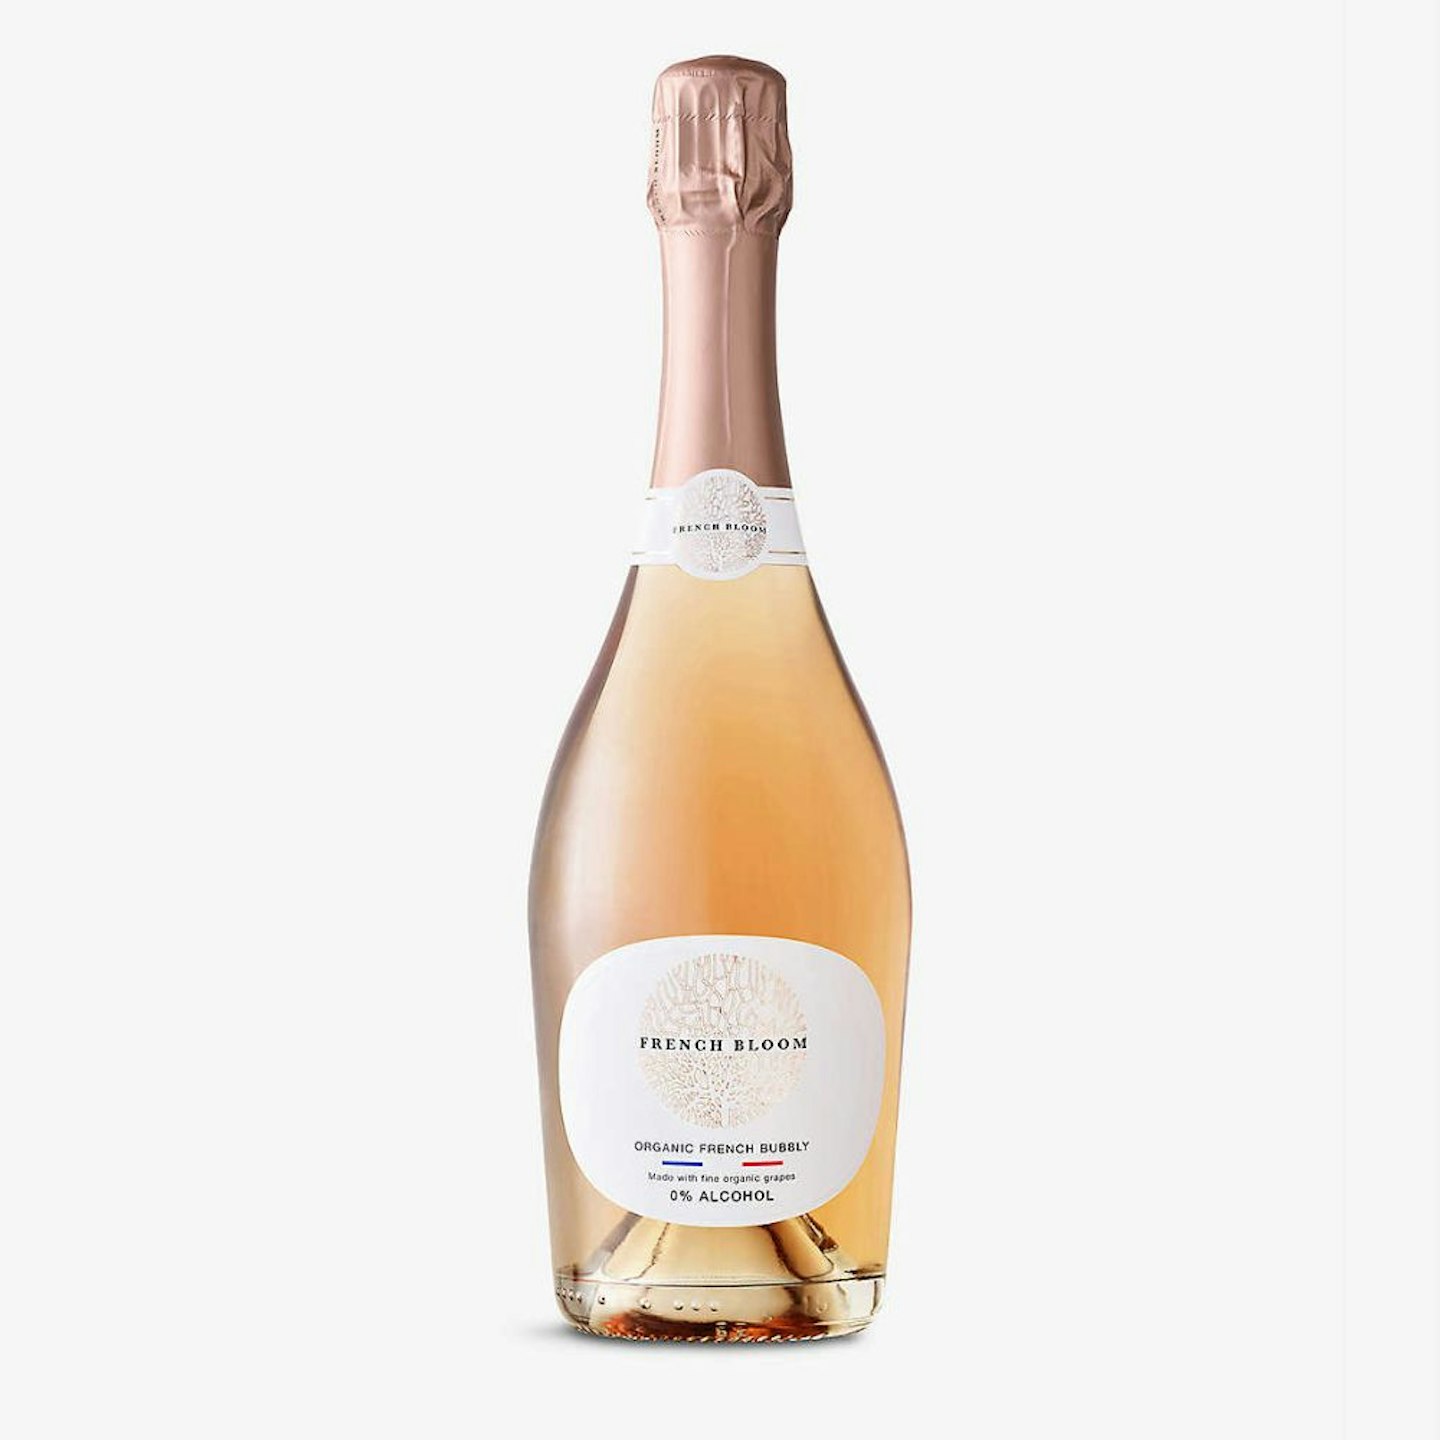 French Bloom Le Rosé organic French bubbly 750ml